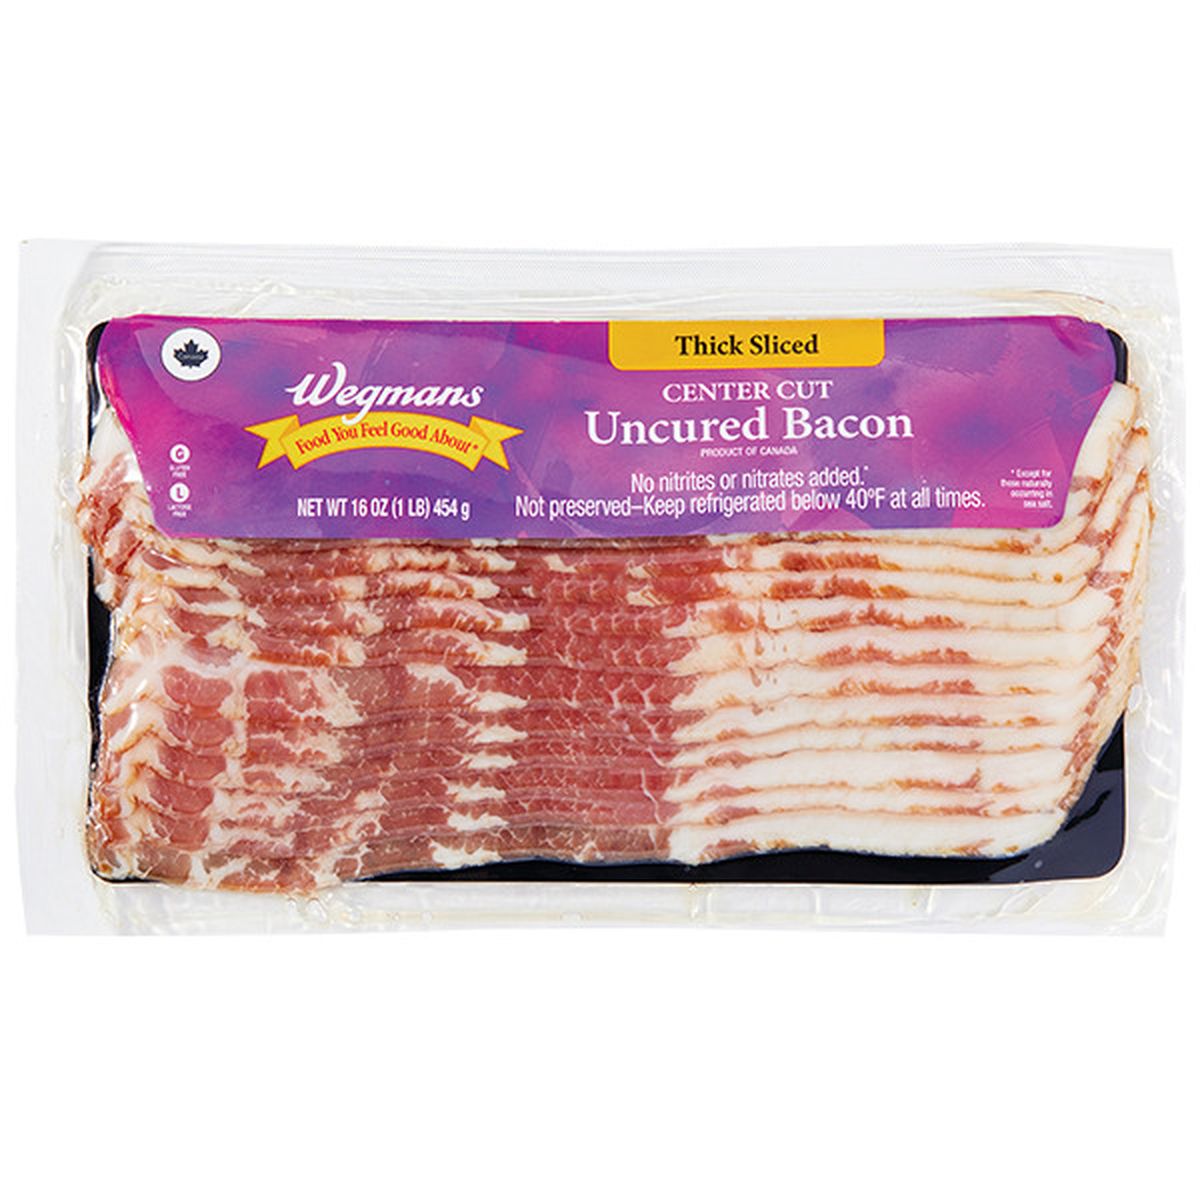 Calories in Wegmans Thick Sliced Center Cut Uncured Bacon